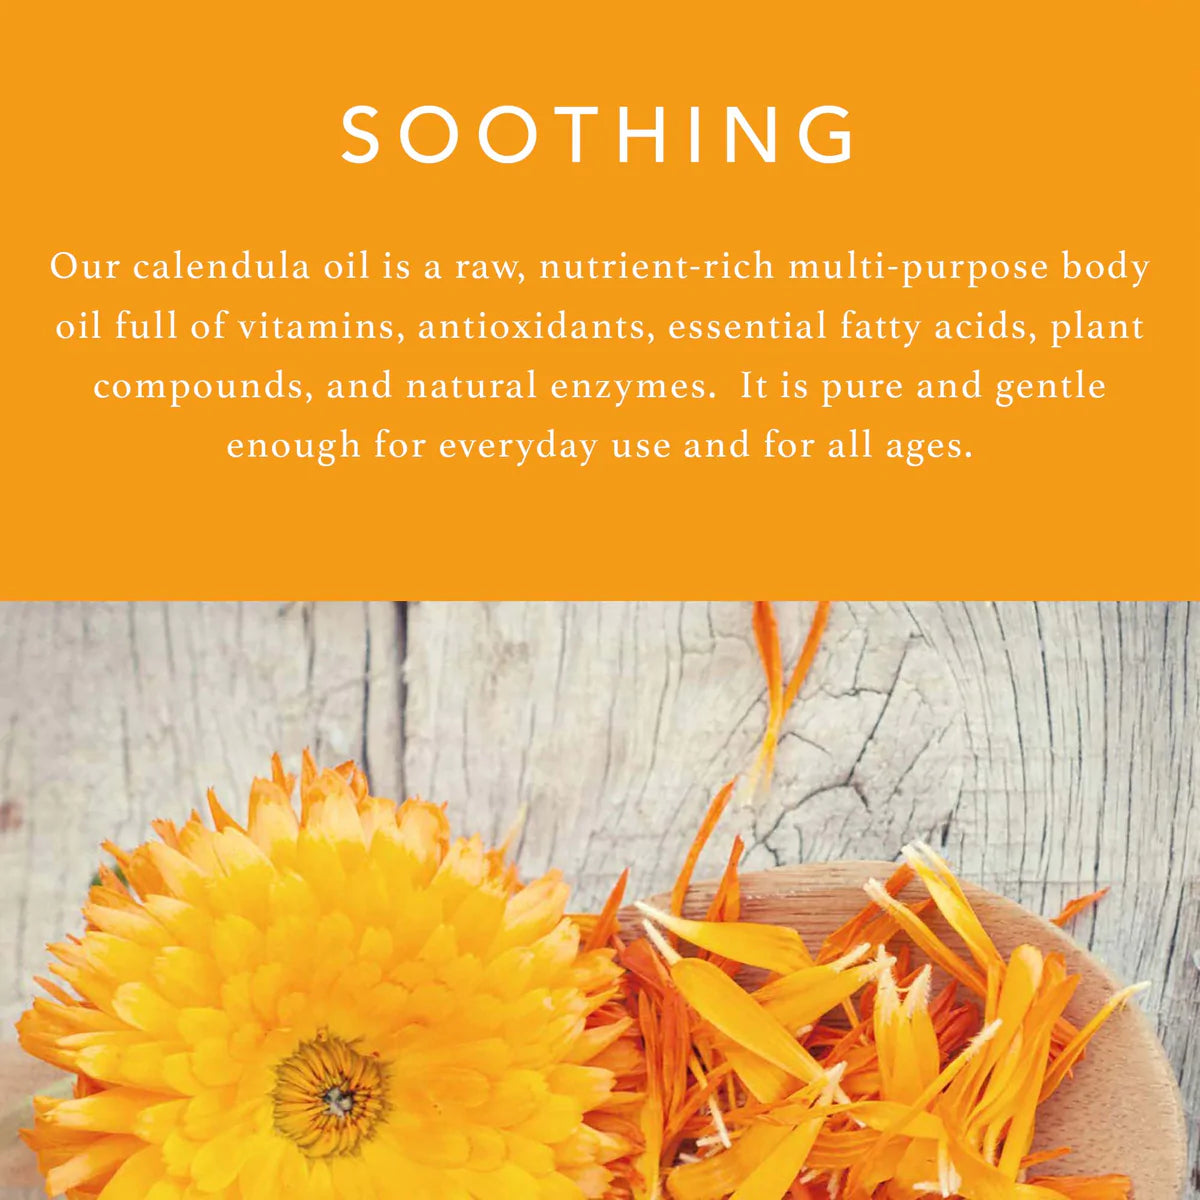 Calendula flowers and copy that says "Soothing" and talks about the vitamins and healing properties of the flower.